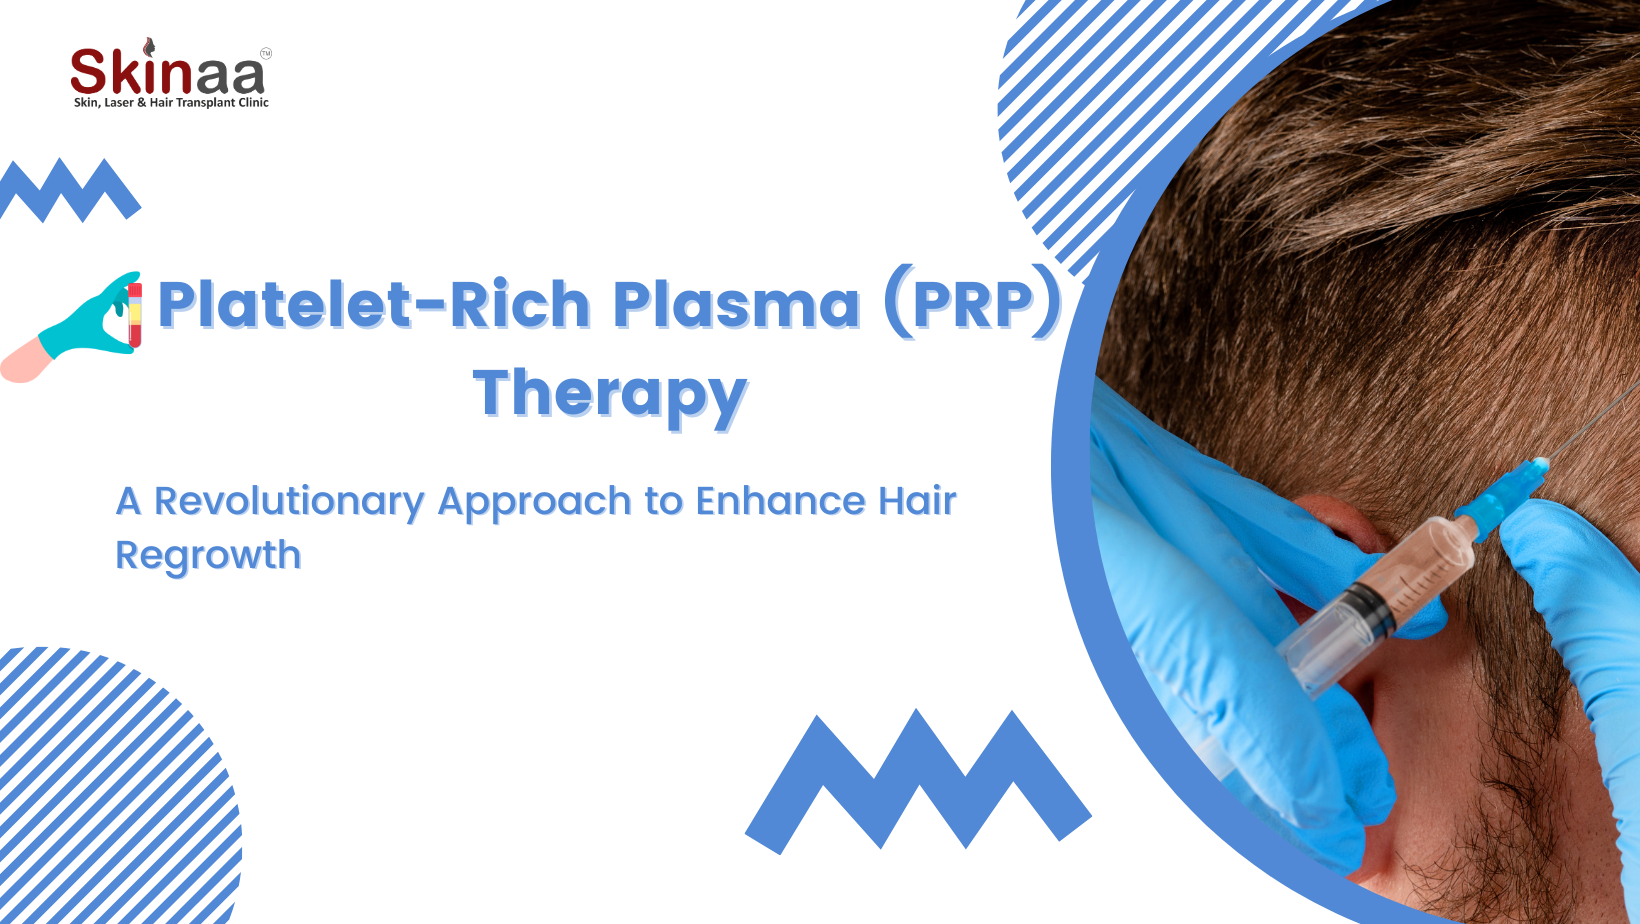 Platelet-Rich Plasma (PRP) Therapy: A Revolutionary Approach to Enhance Hair Regrowth